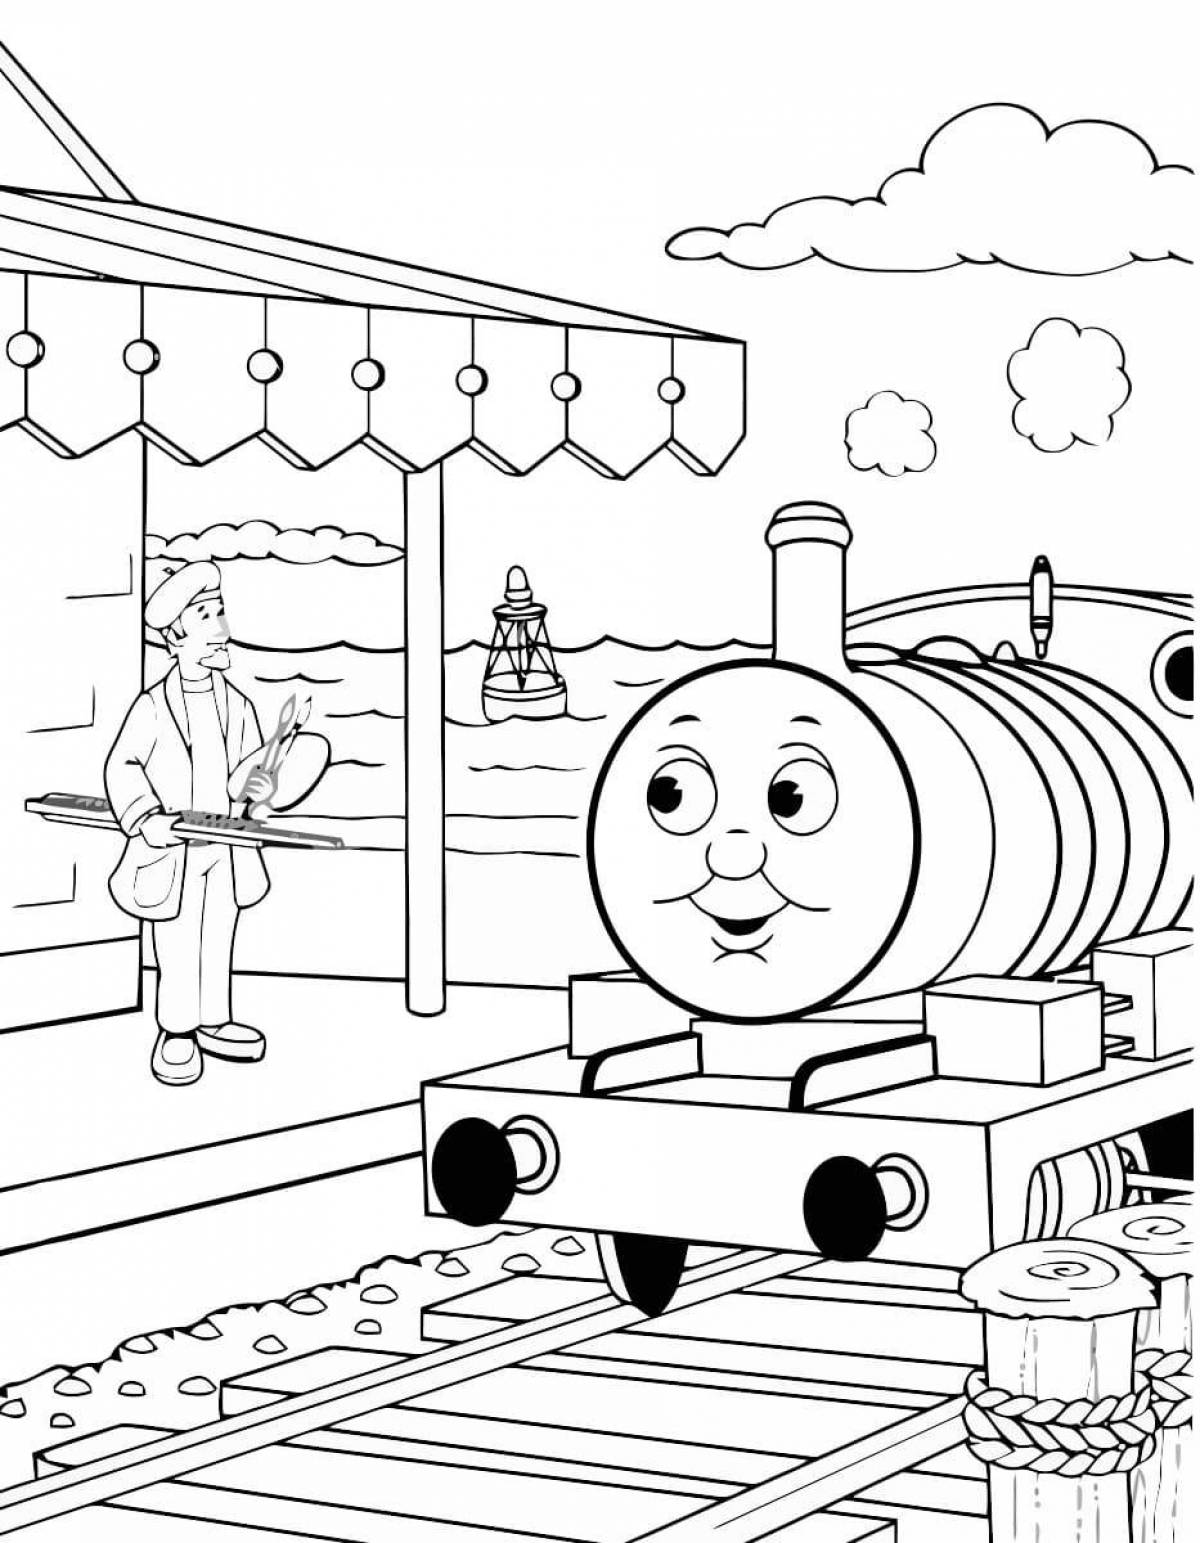 Flawless Thomas the Tank Engine coloring page